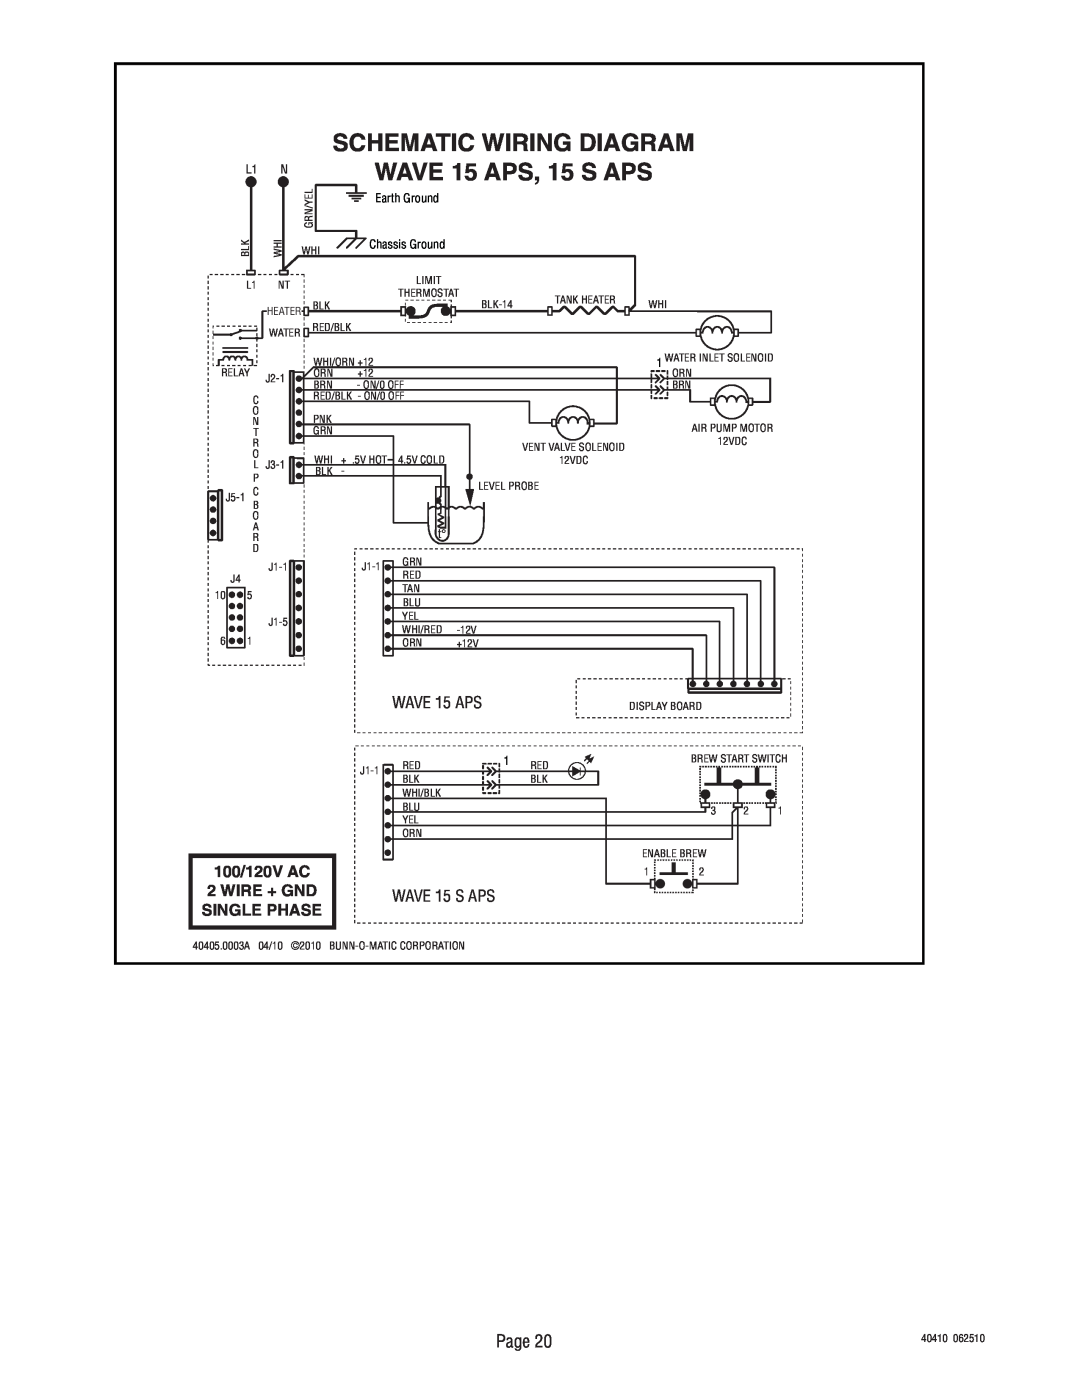 Bunn 40410.0000G Schematic Wiring Diagram, WAVE 15 APS, 15 S APS, Page, 100/120V AC, Wire + Gnd, WAVE 15 S APS 